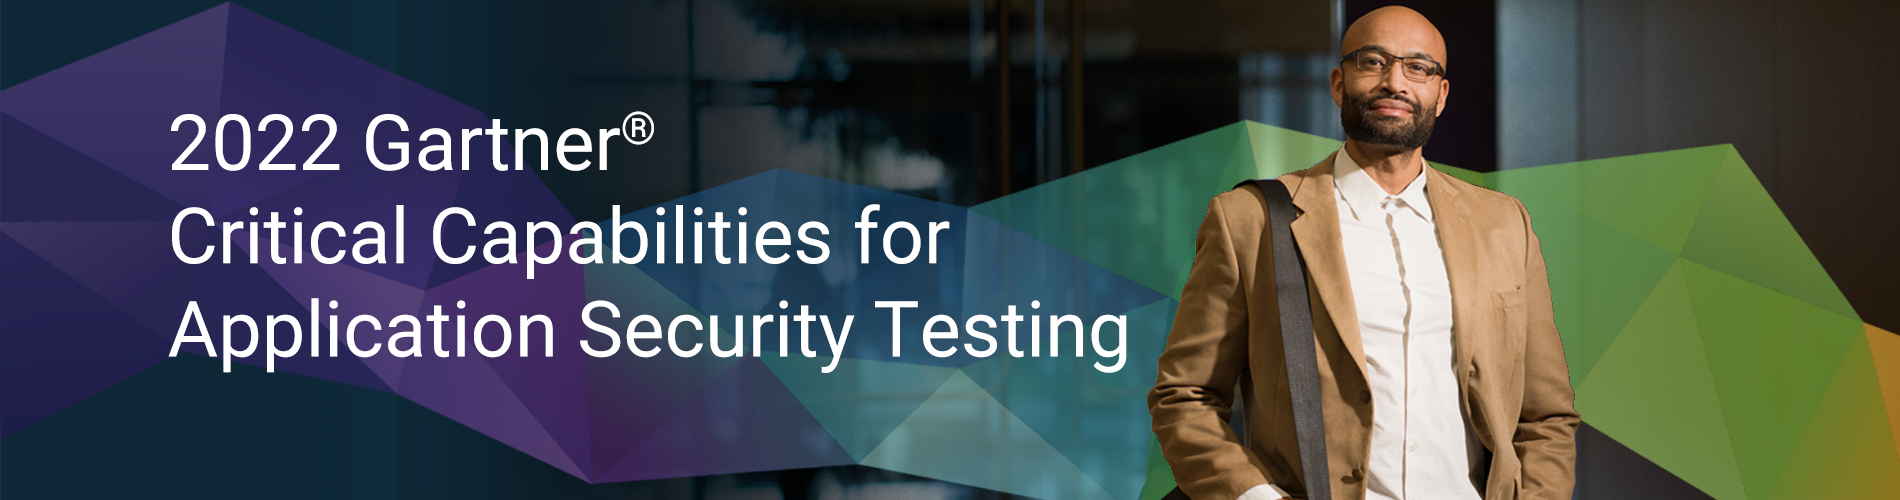 Gartner Critical Capabilities for Application Security Testing | Synopsys